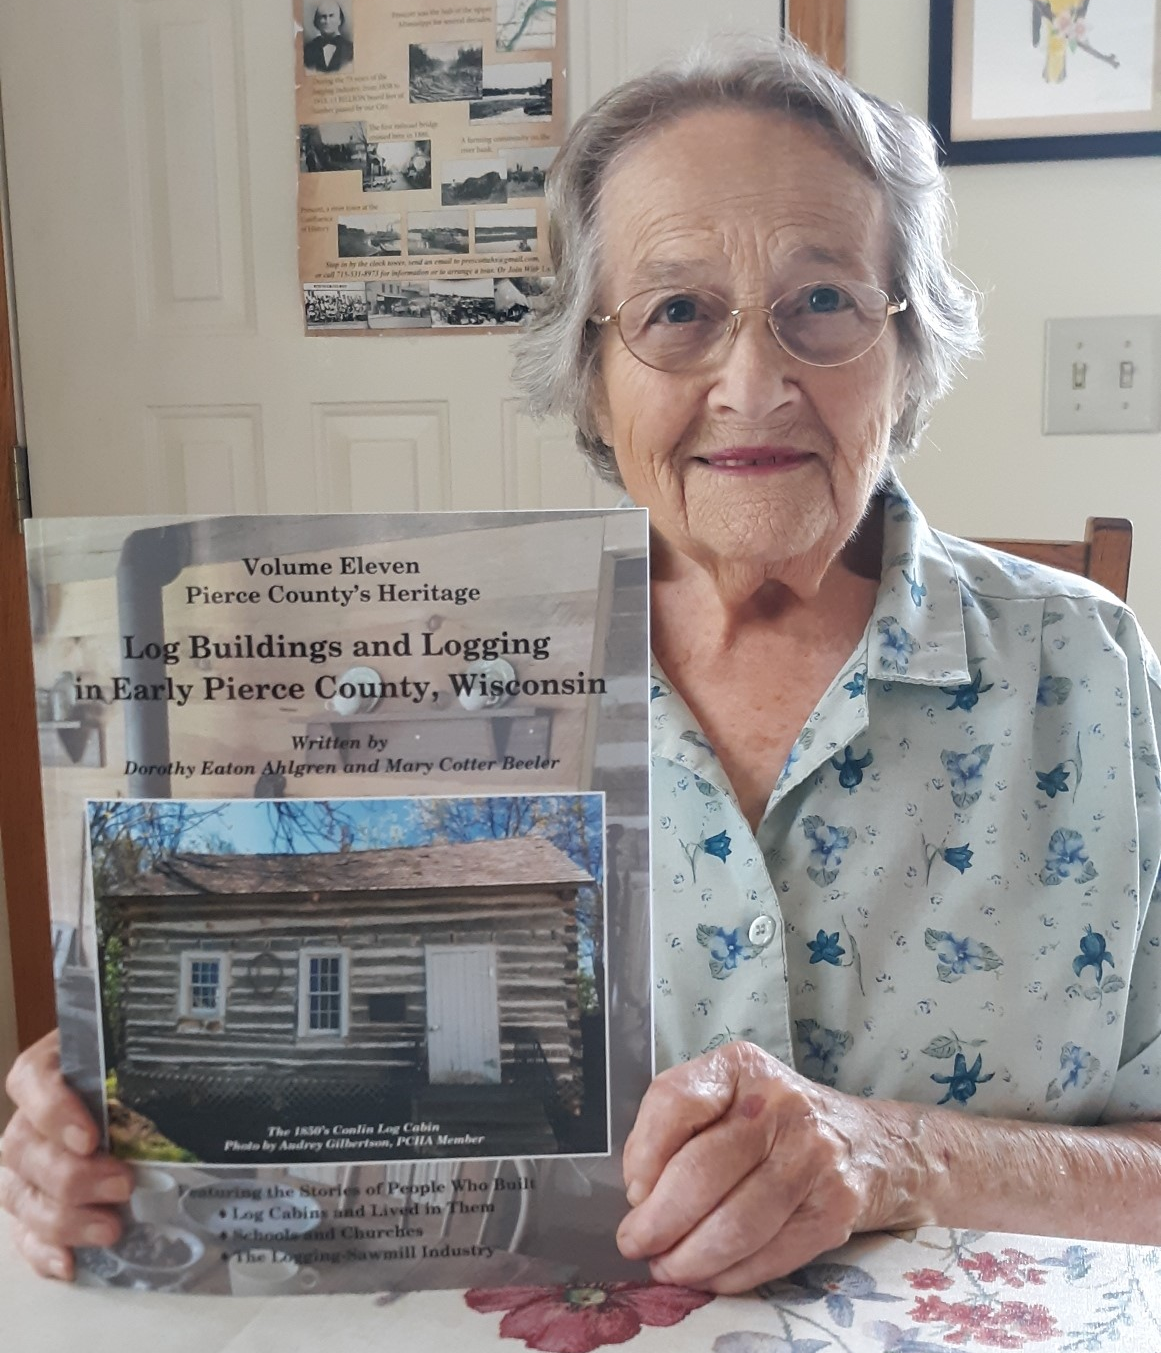 Pierce County Historian Publishes Book at Age 92